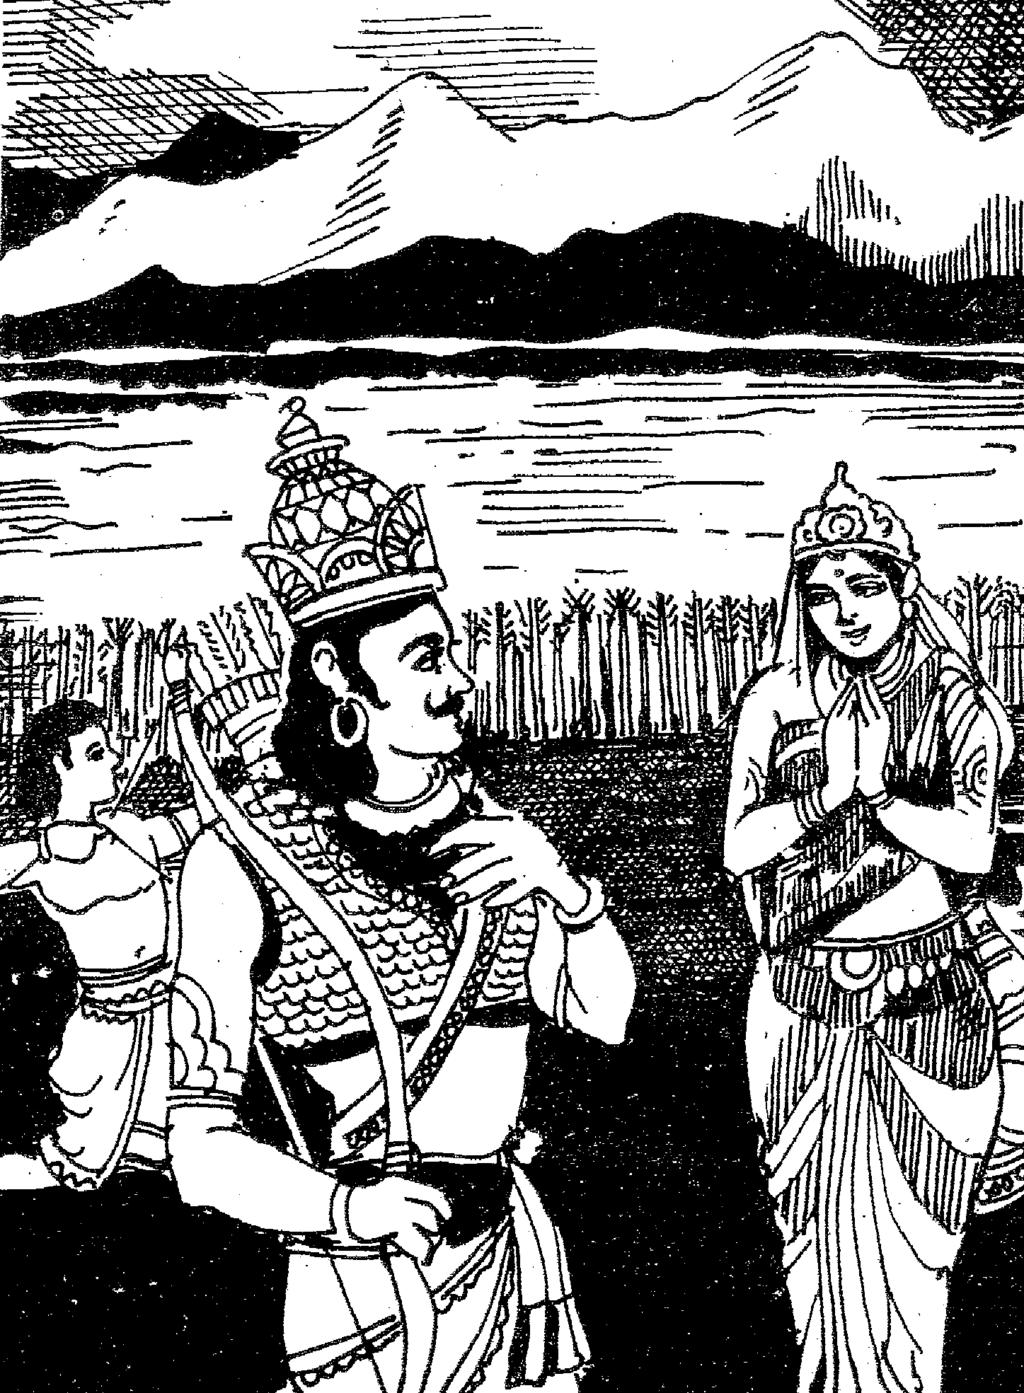 Queen Ganga turned around and said, "Oh King, you have violated your pledge. I will not stay with you any longer. I am Ganga, the goddess of heaven.